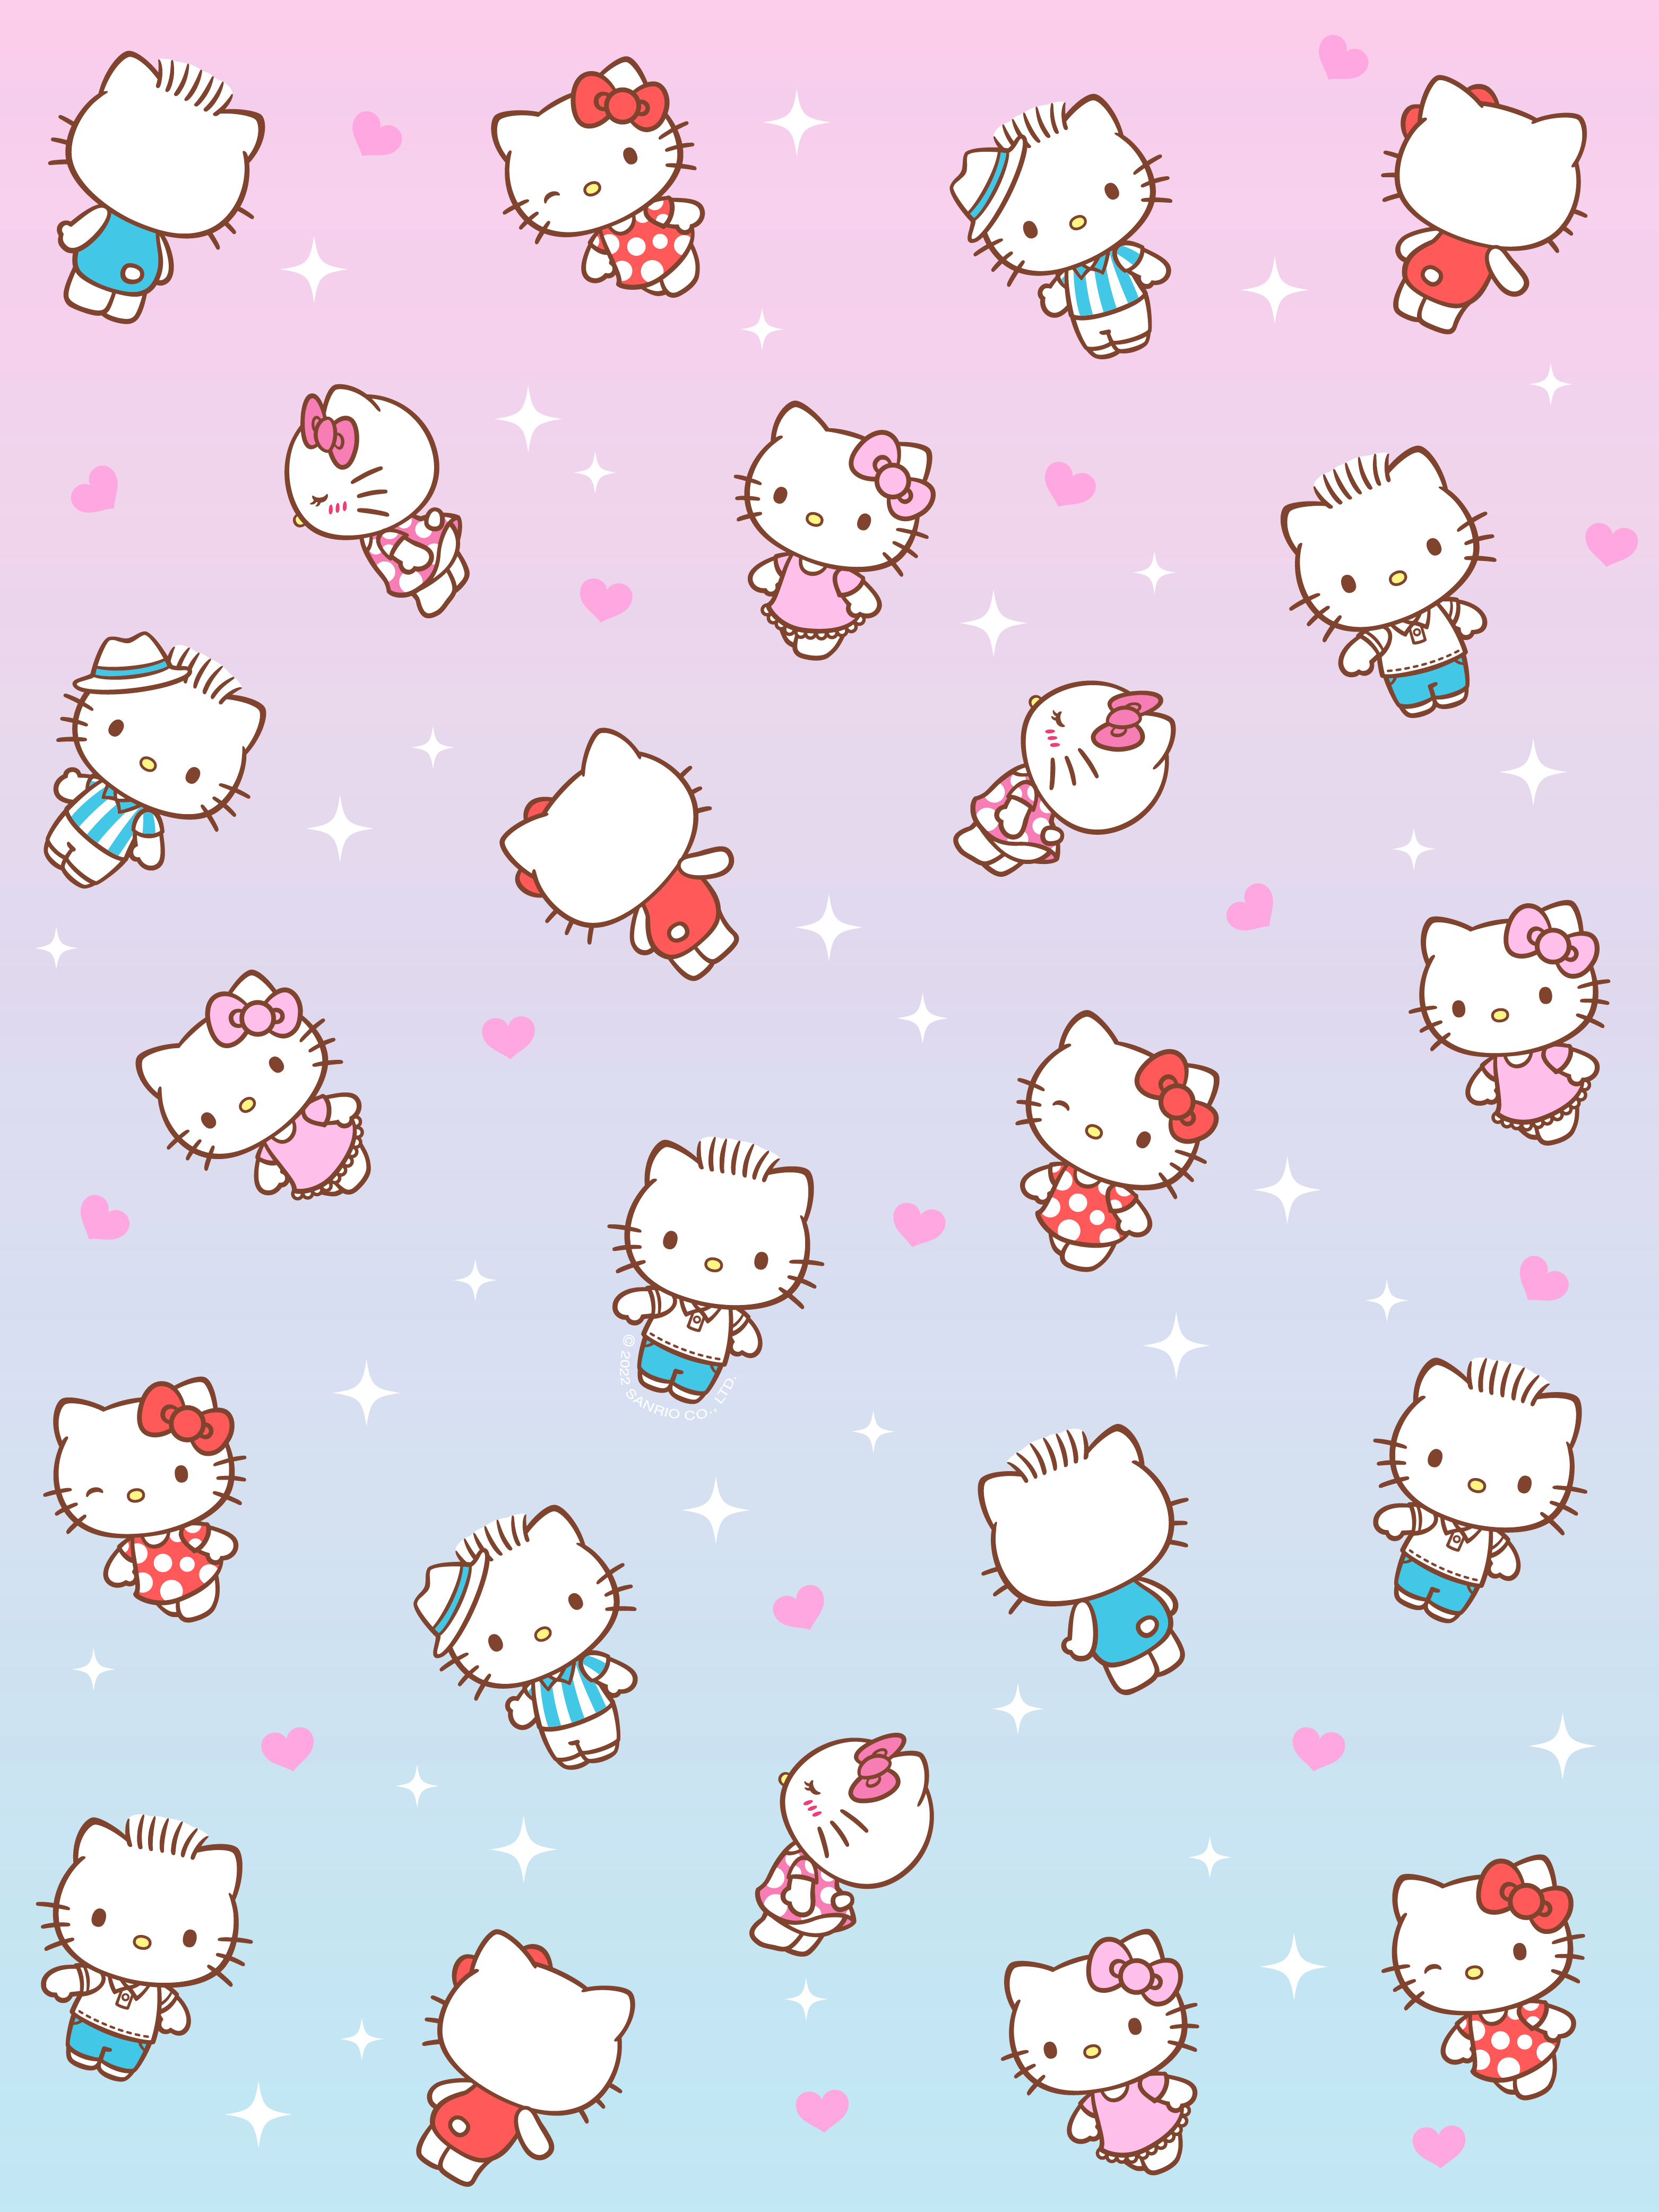 Wallpaper Hello Kitty on Pink Background Licensed by Sanrio 34878505893 |  eBay